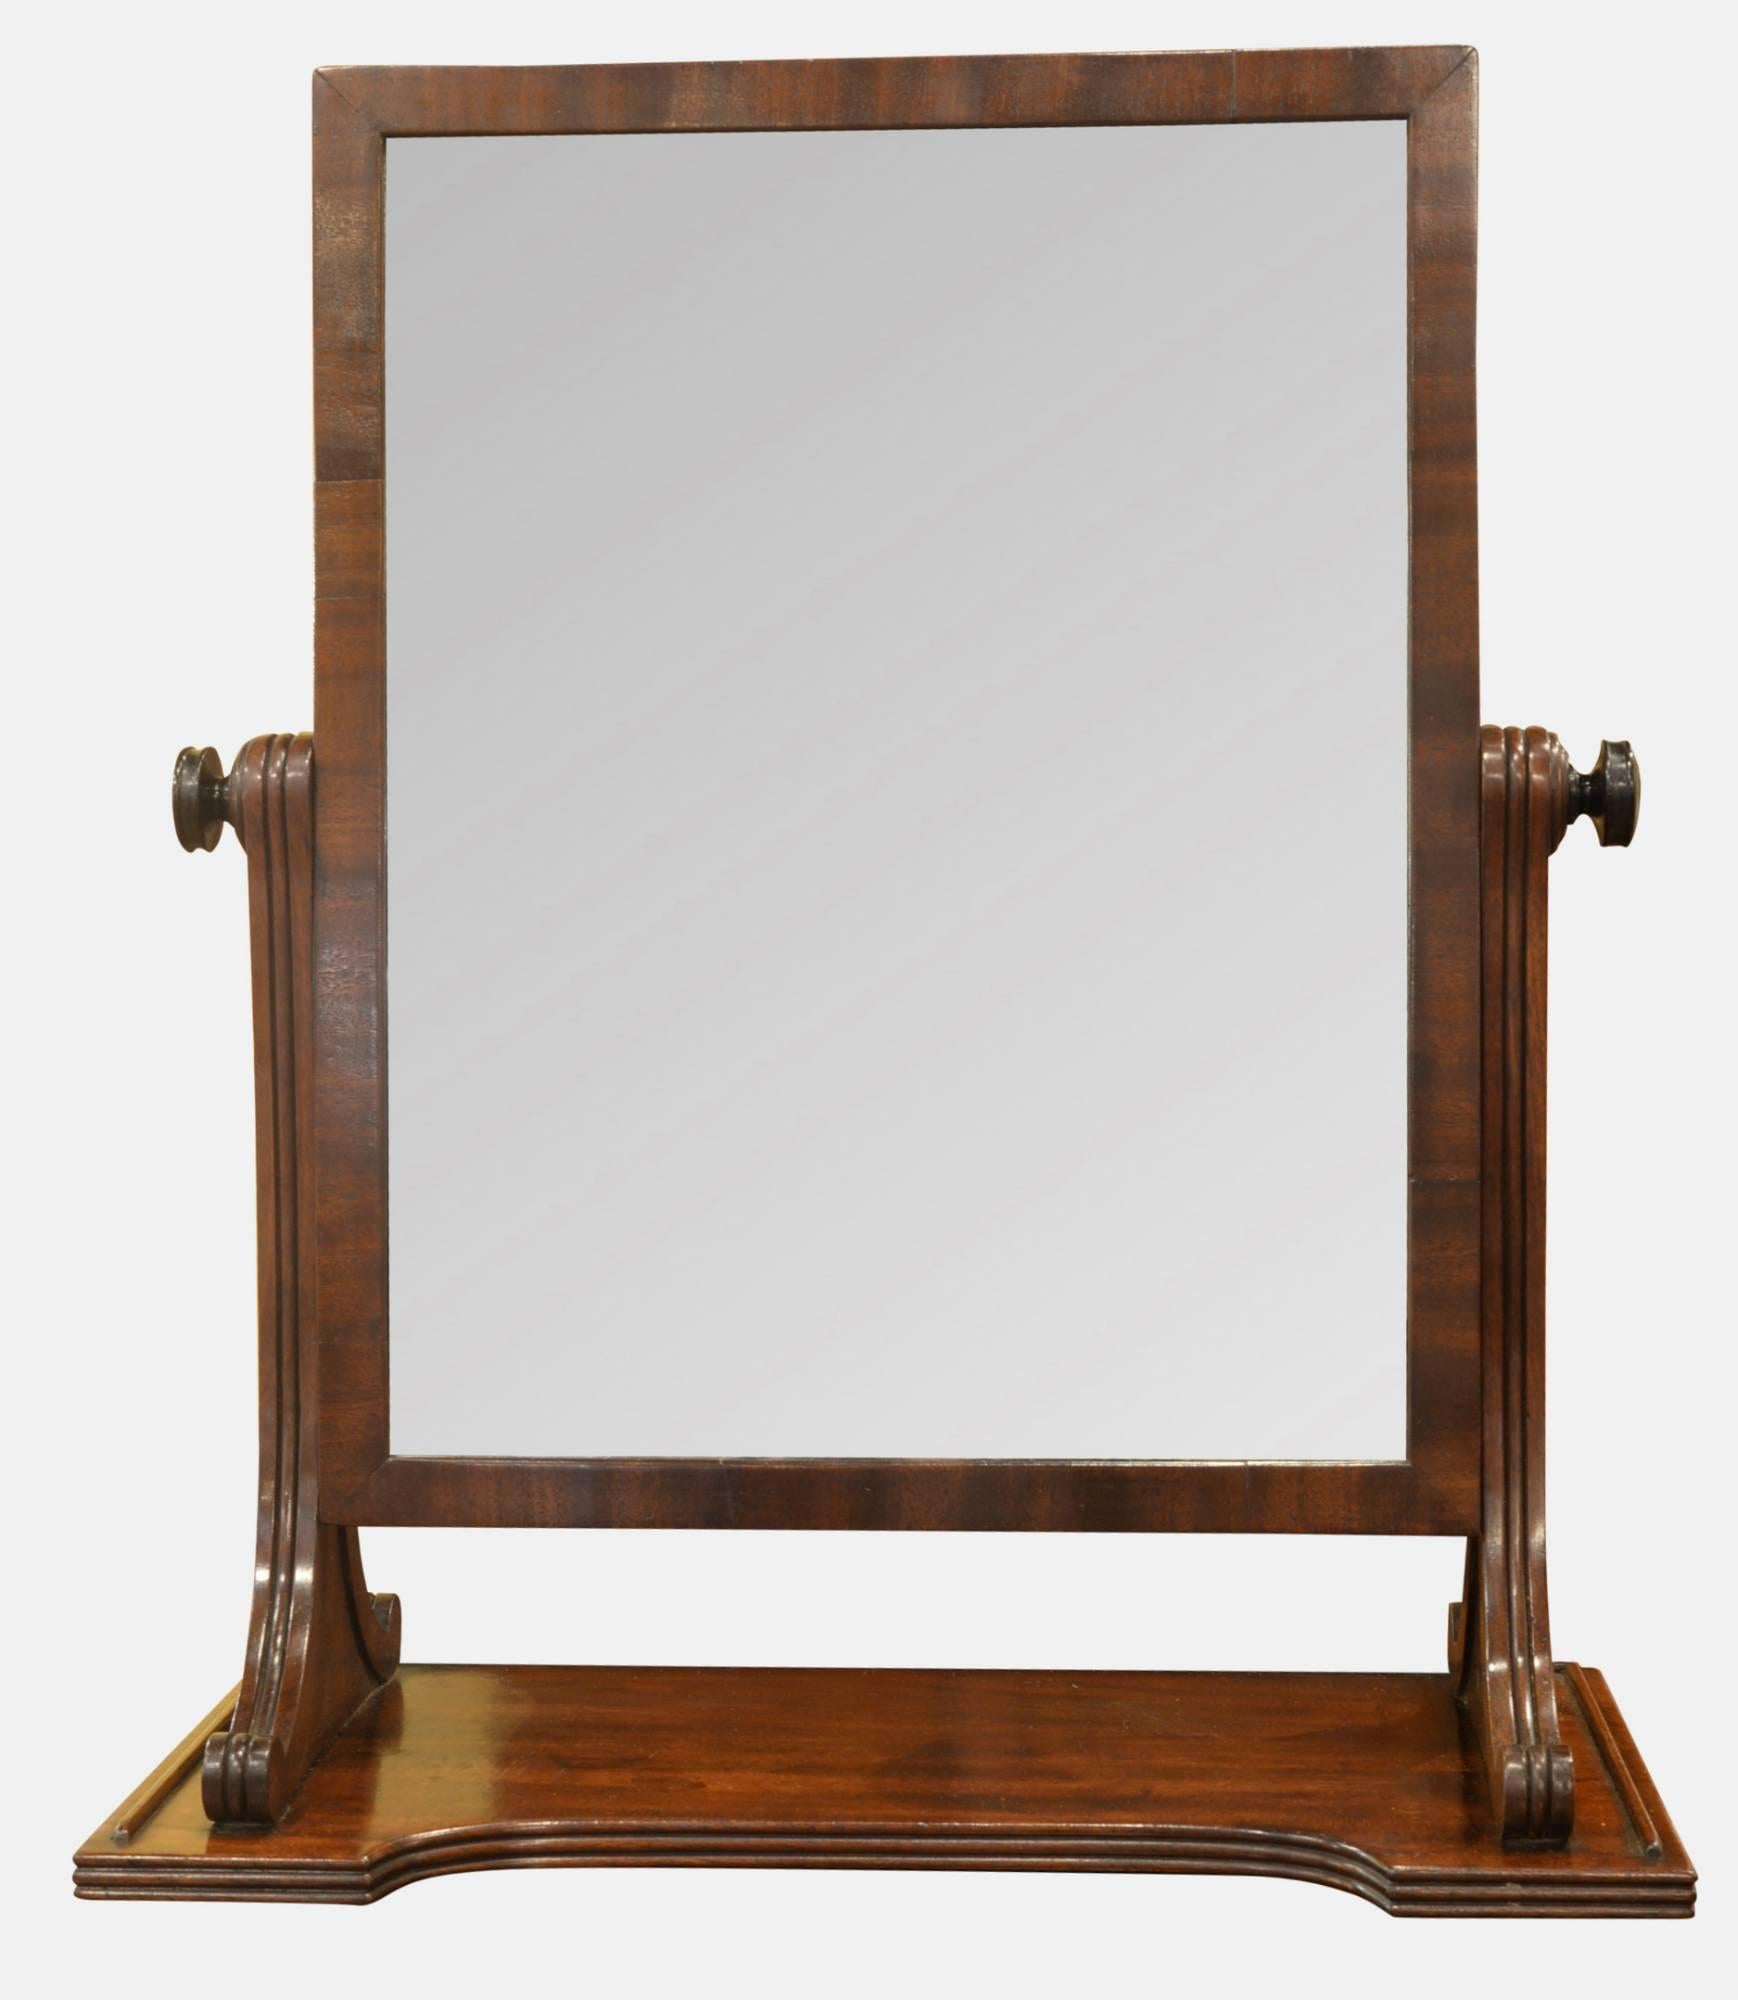 An early 19th century mahogany swing mirror in the manner of Gillows.